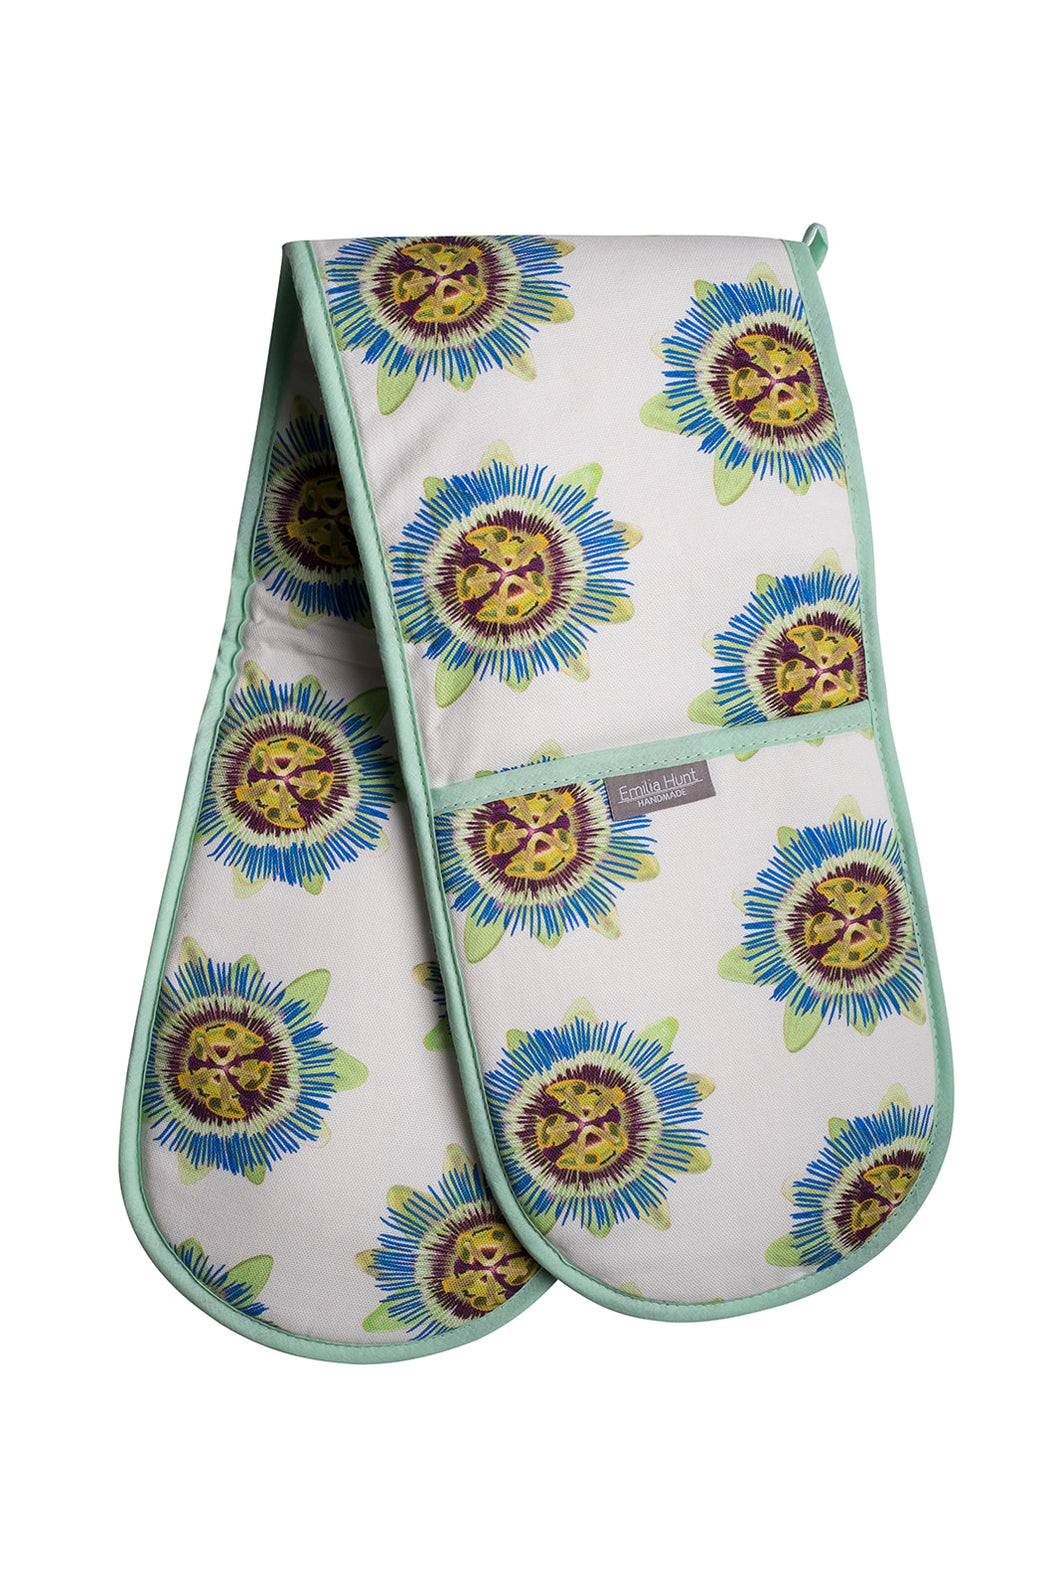 White Passion Flower Double Oven Gloves